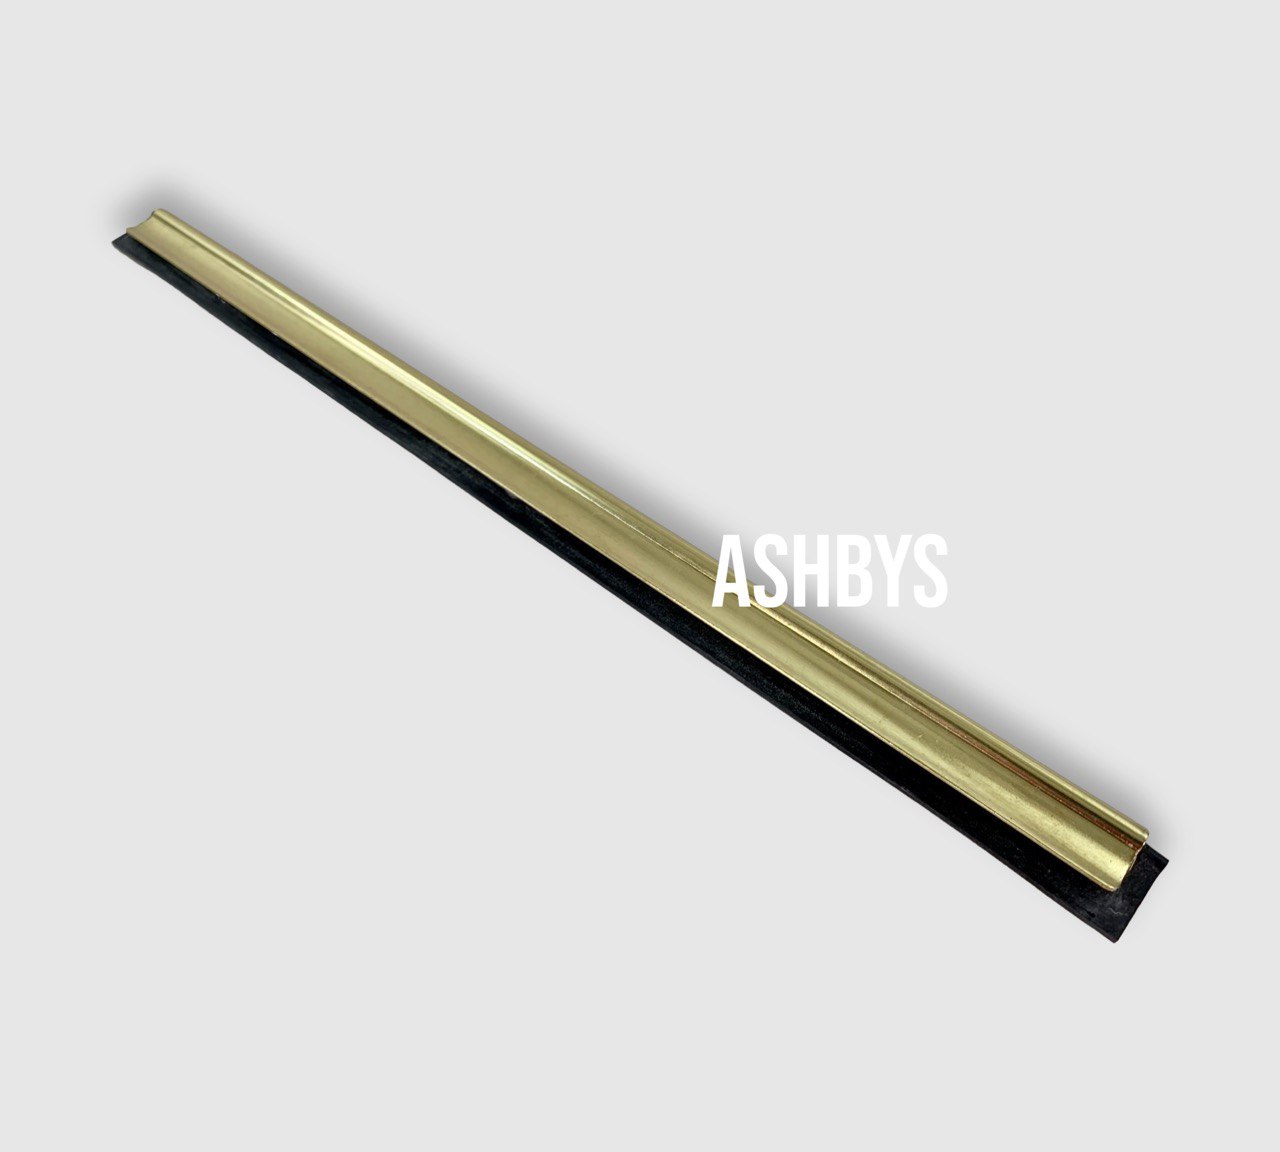 Brass Channel & Rubber (35 cm / 14” inch) - for Window Cleaning